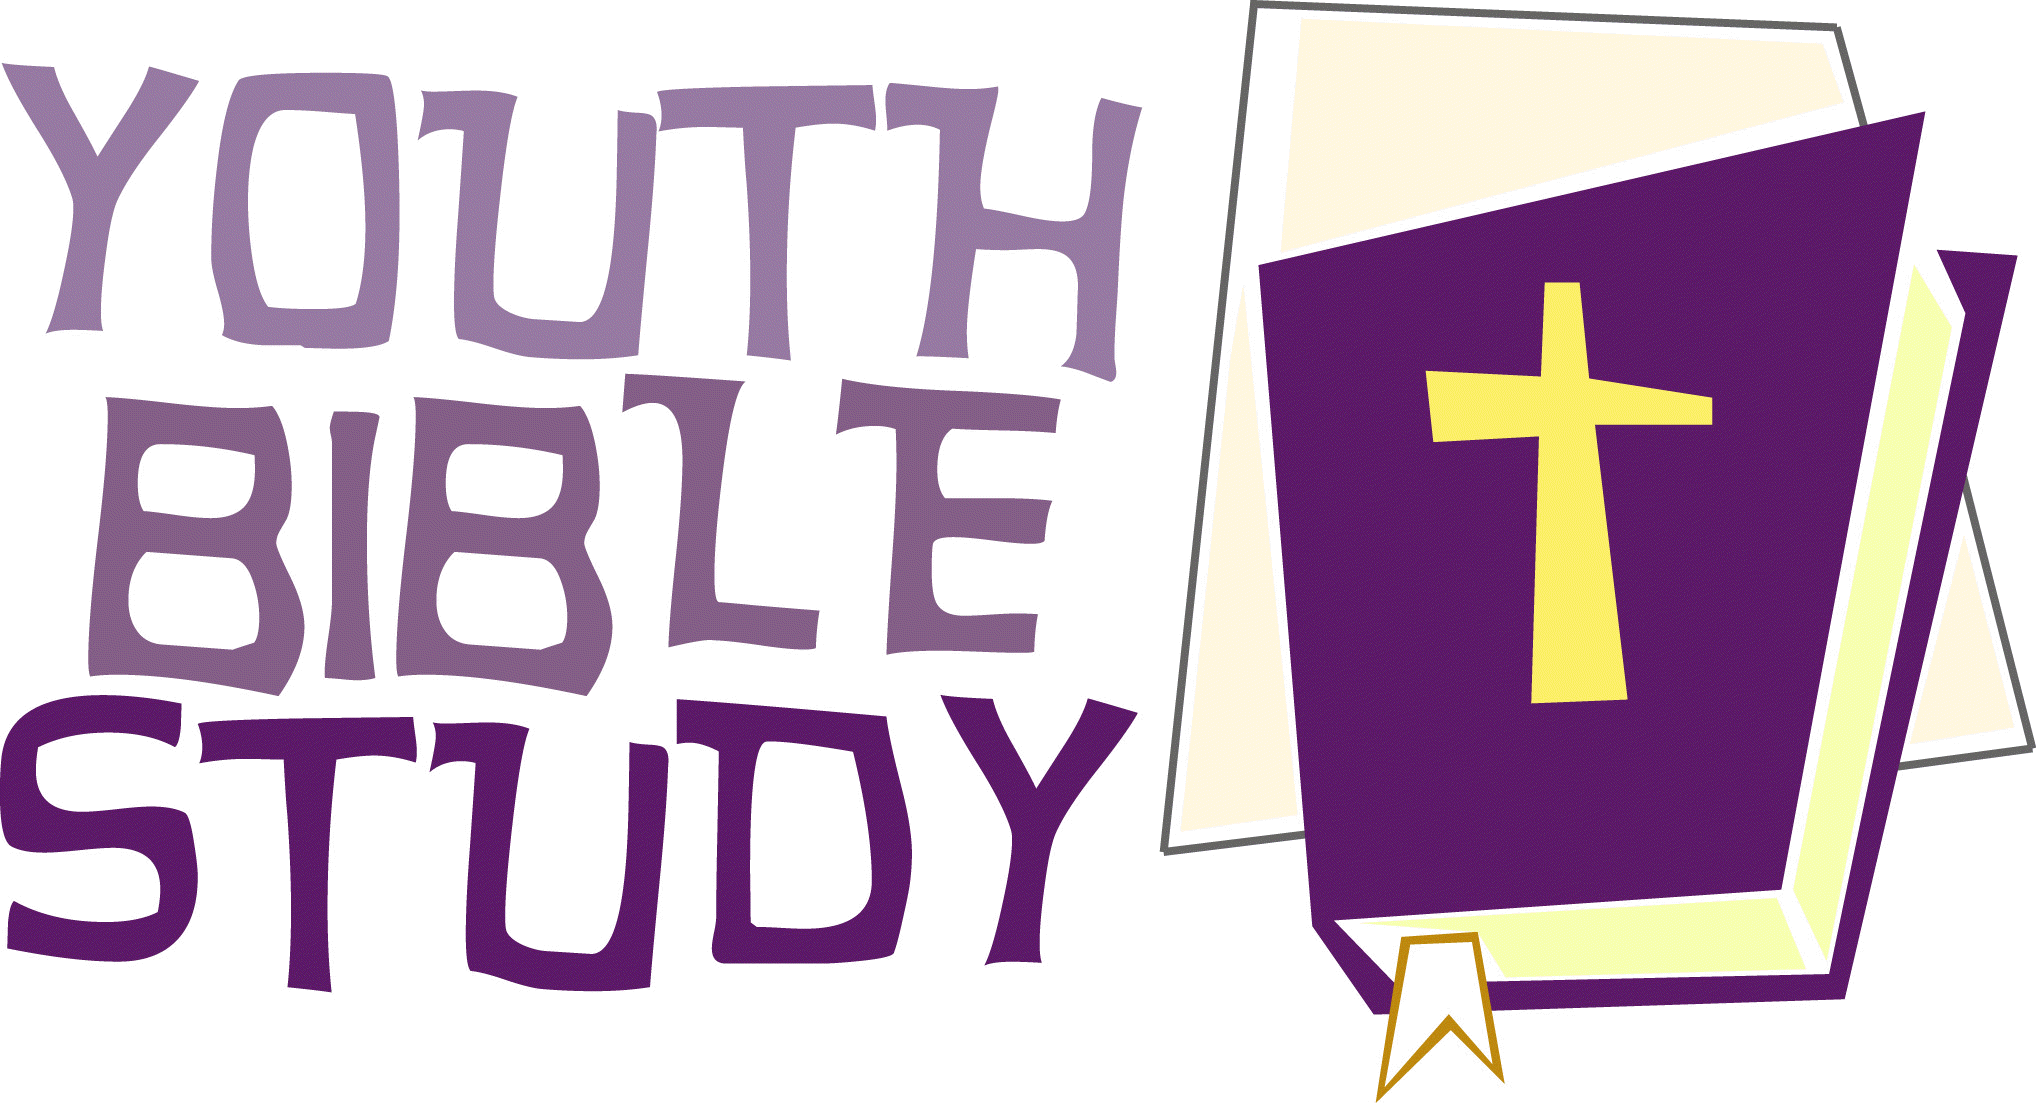 group clipart bible study